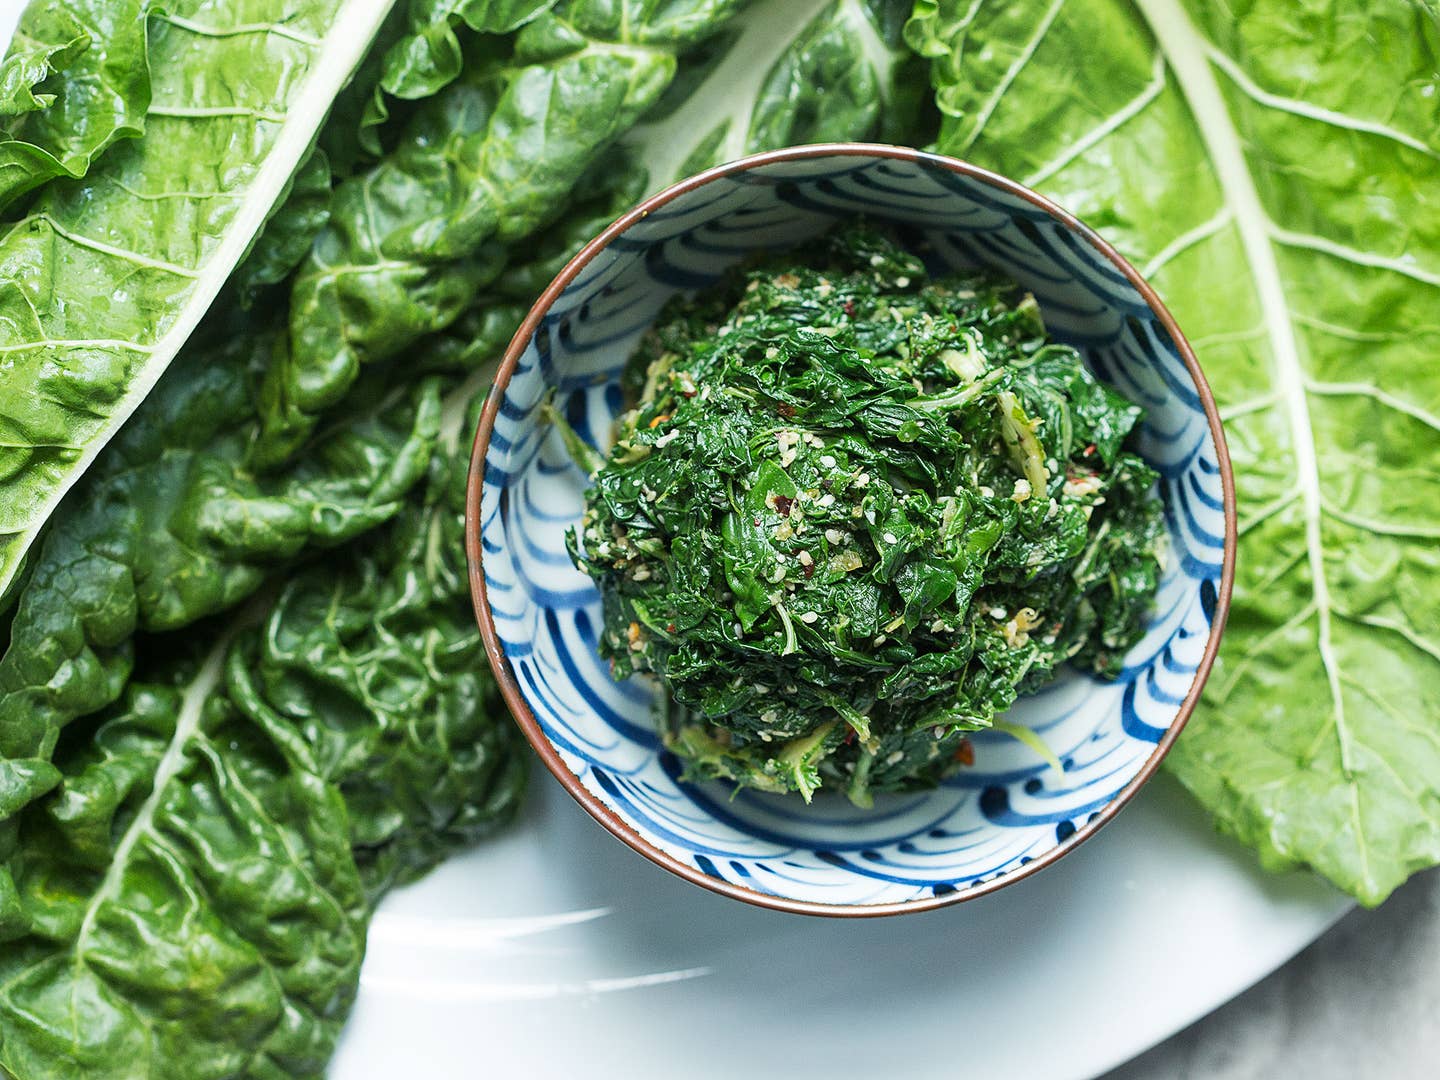 Pound Tough Greens With a Mortar and Pestle for Better Salads